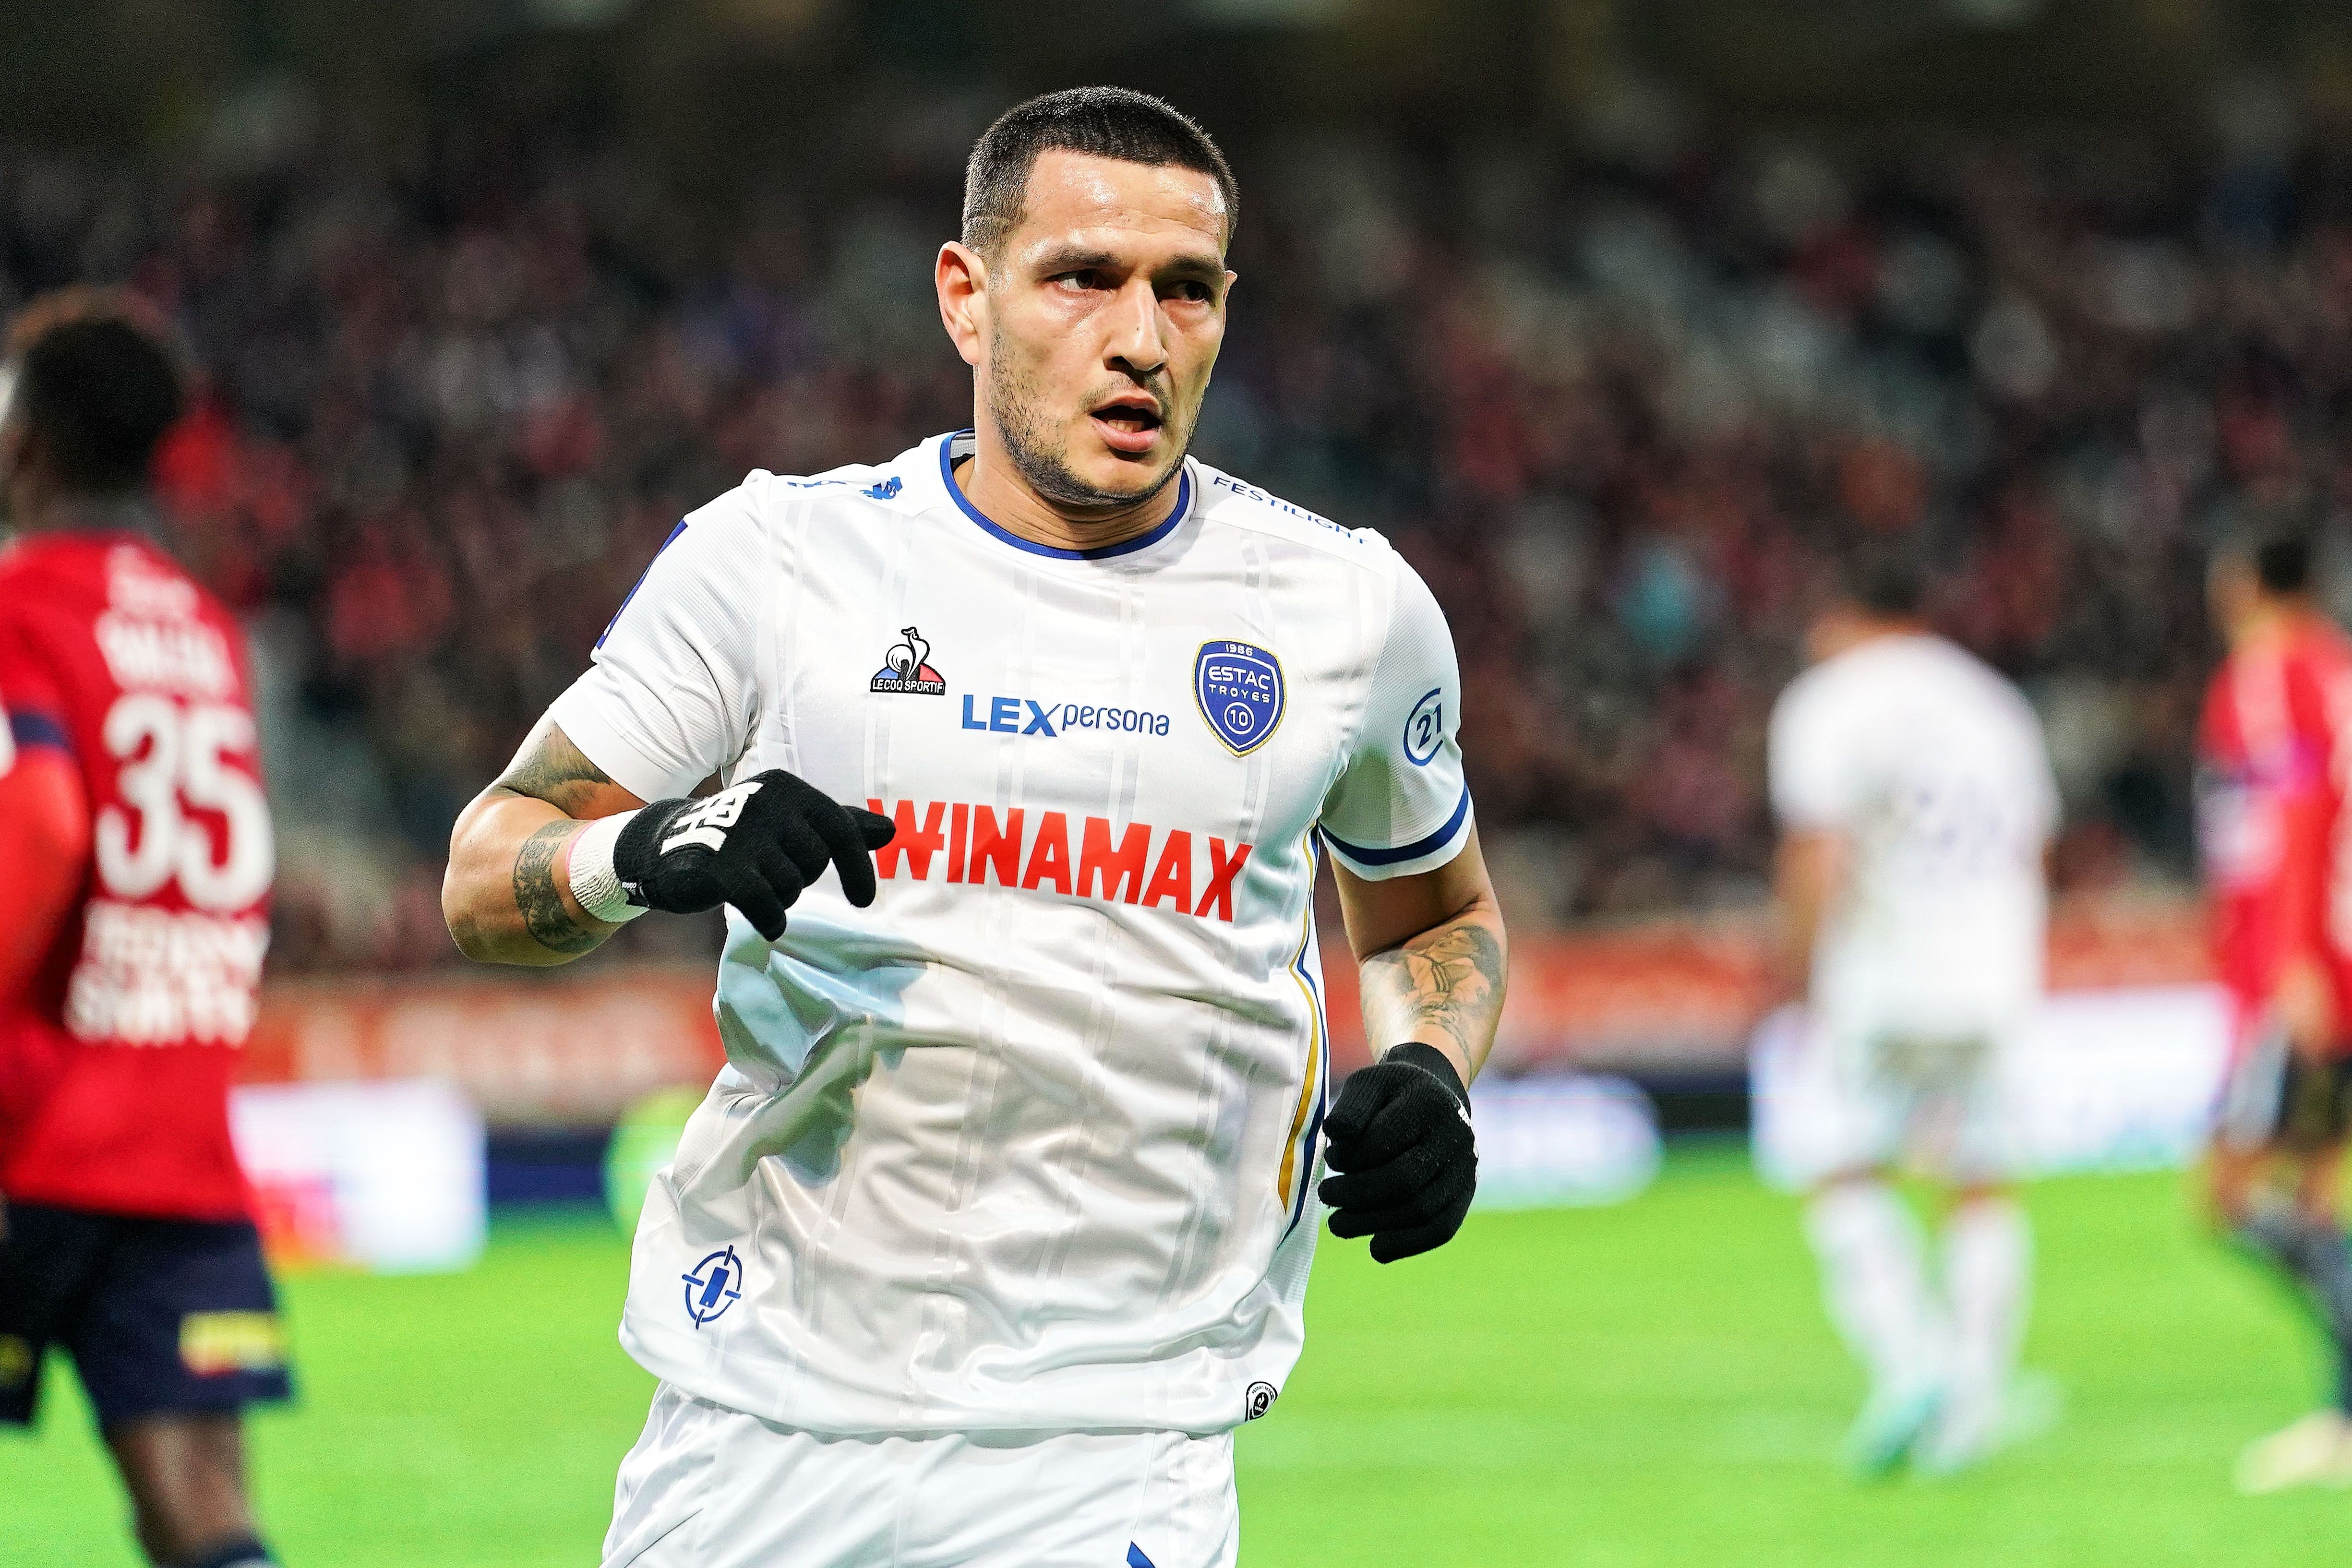 Rony Lopes of ESTAC Troyes in action during the Ligue 1 Uber Eats match between Lille OSC (LOSC) and ESTAC Troyes.